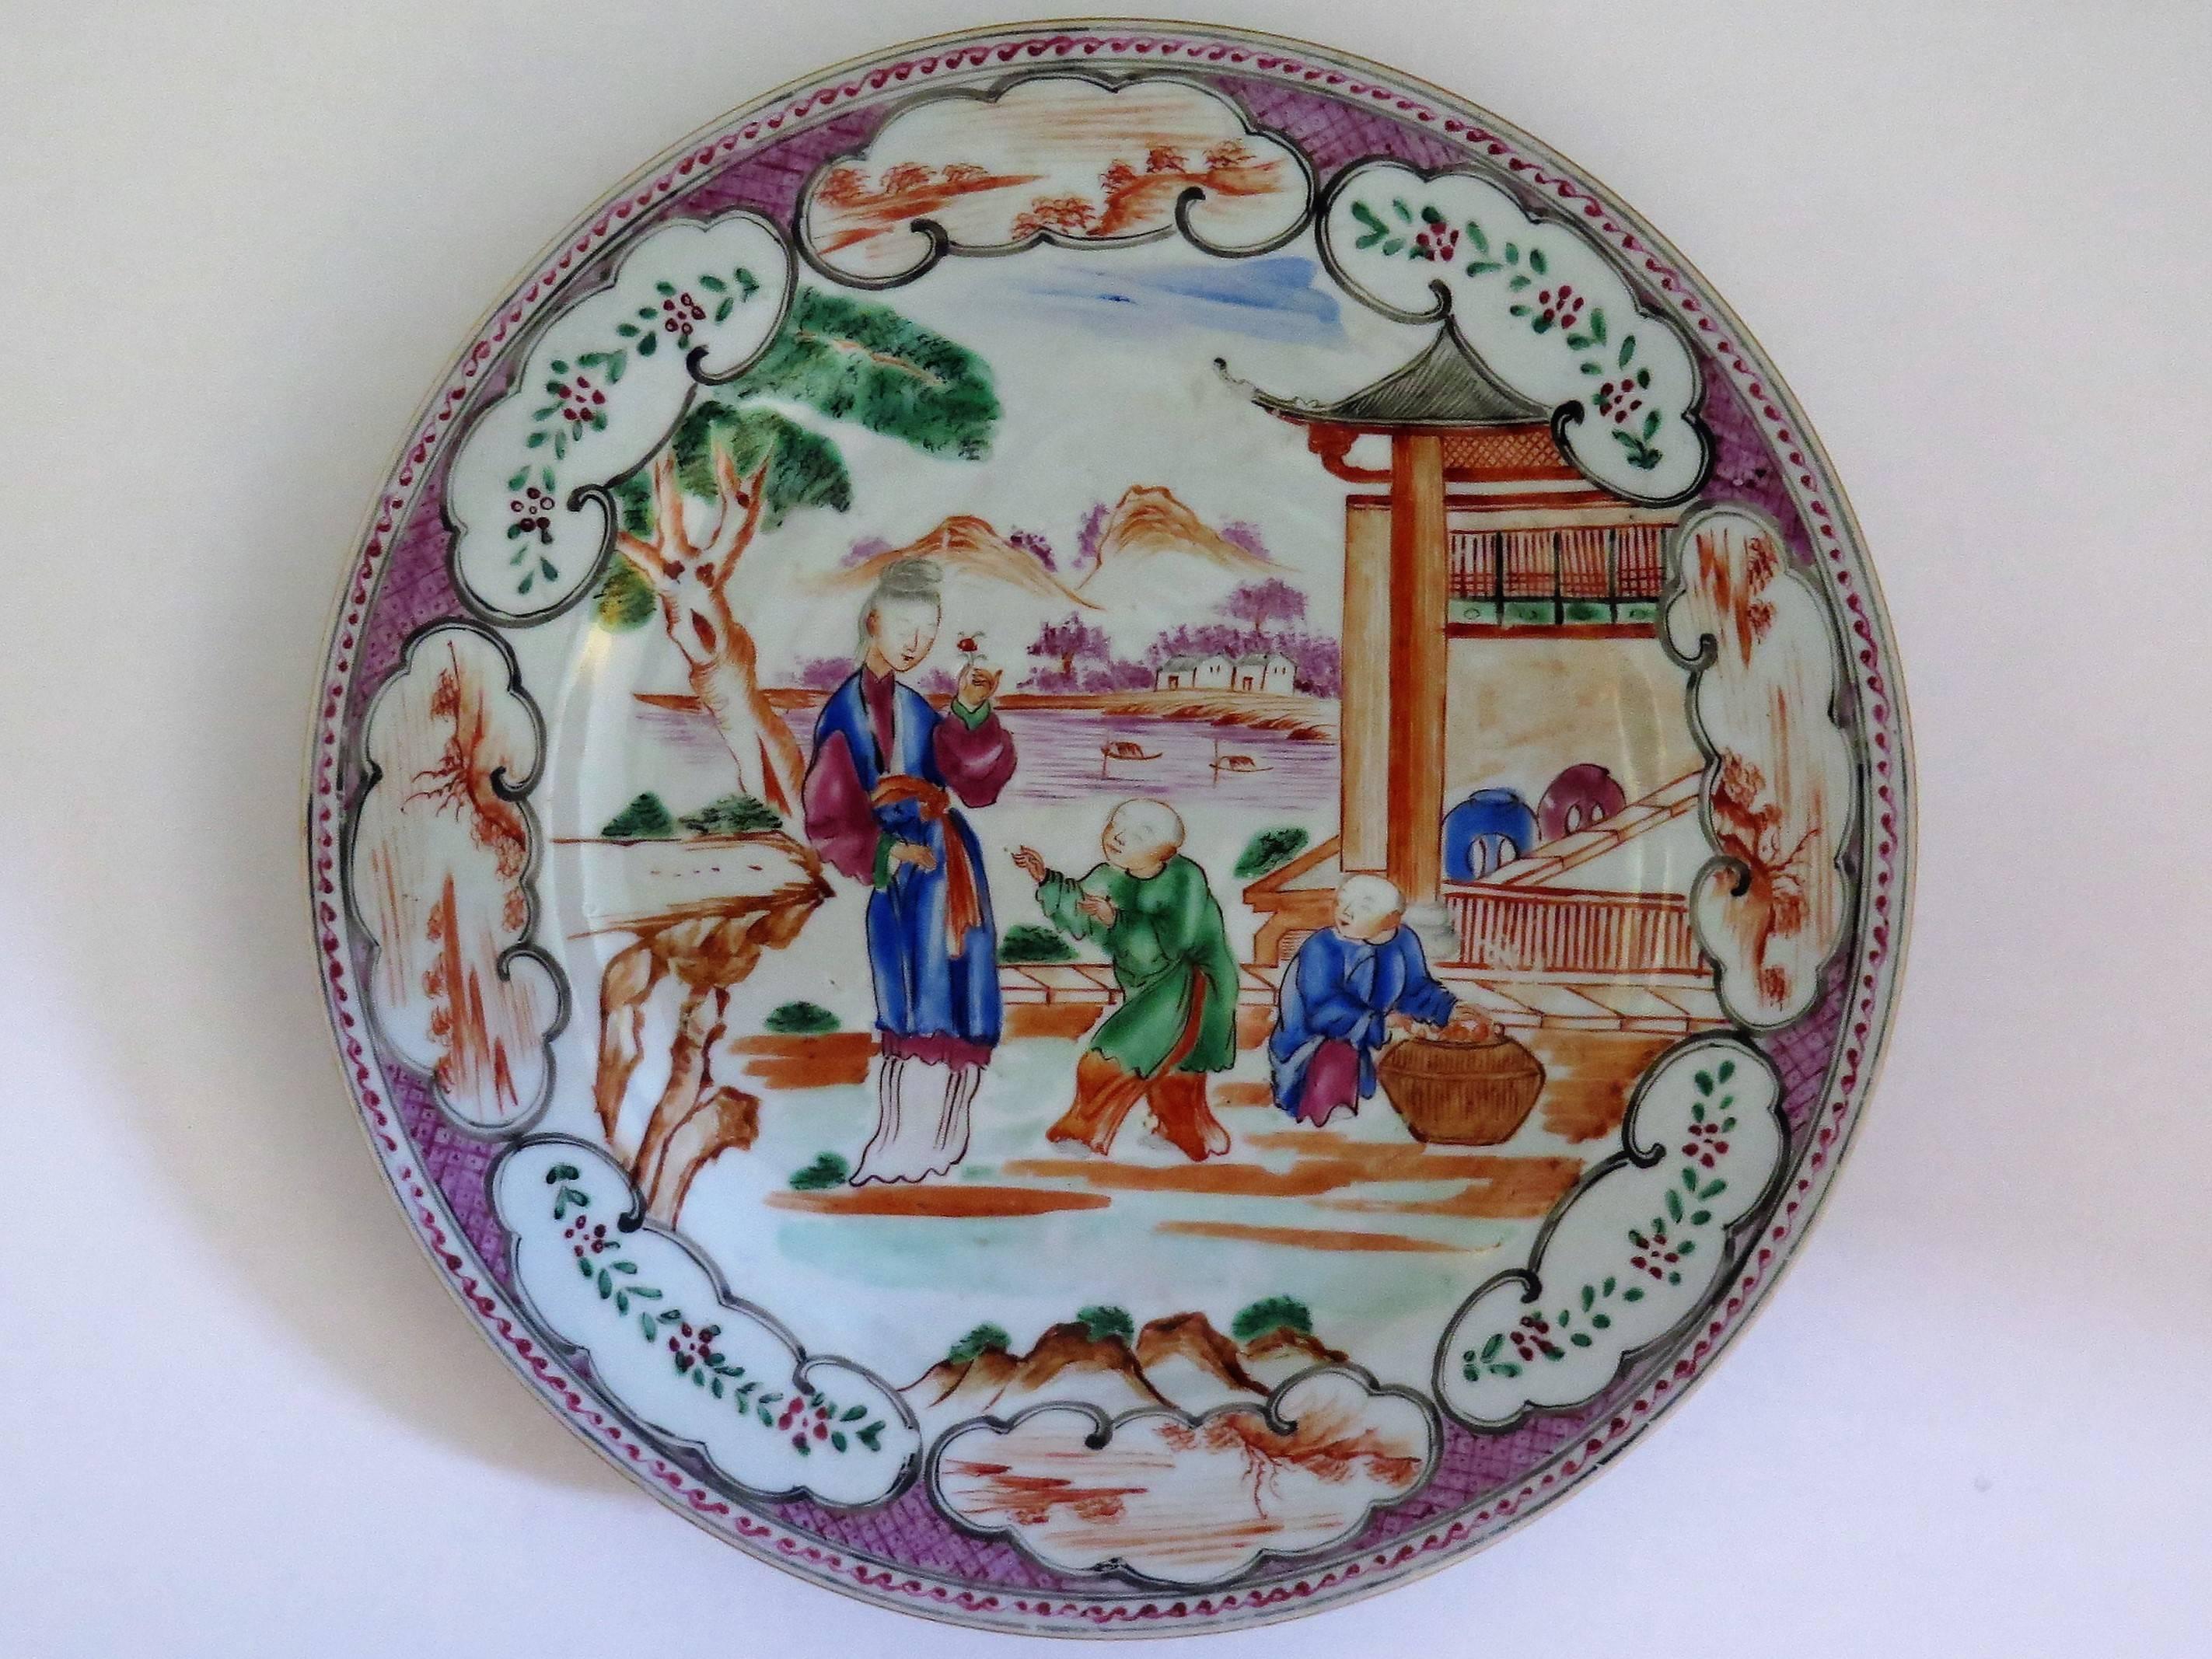 This is a fine Chinese plate from the 18th century, Qing dynasty, Qianlong period, 1736-1795 in very good condition.

It is beautifully decorated with three figures in a pagoda setting, having a lady (long eliza) and two children stood on a